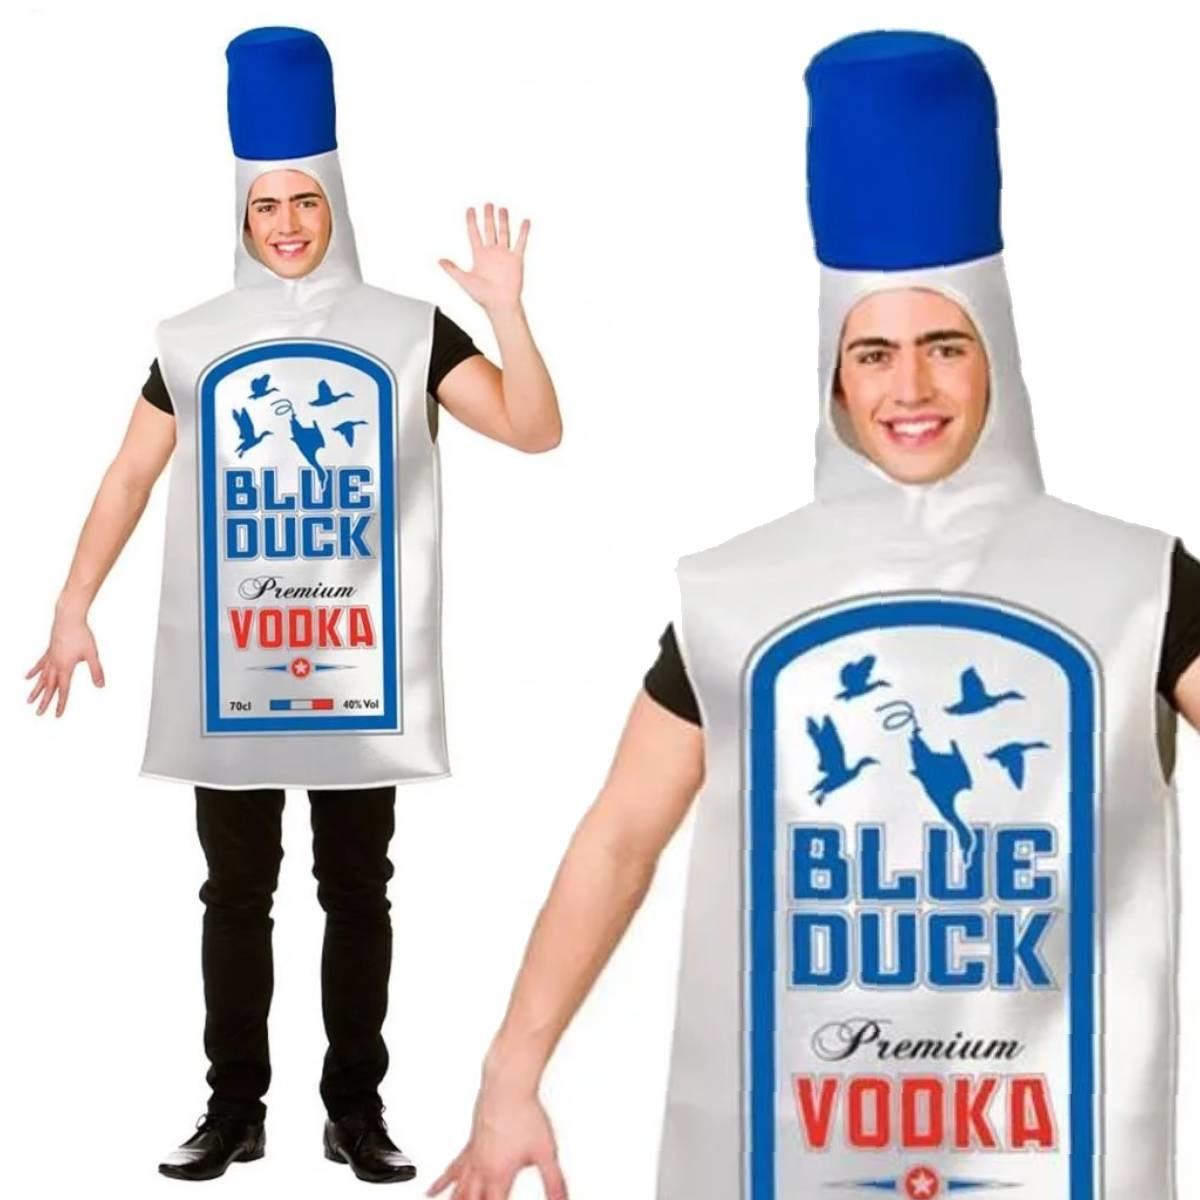 Funny Blue Duck Vodka Bottle Costume for adults by Wicked FN-8627 available here at Karnival Costumes online party shop